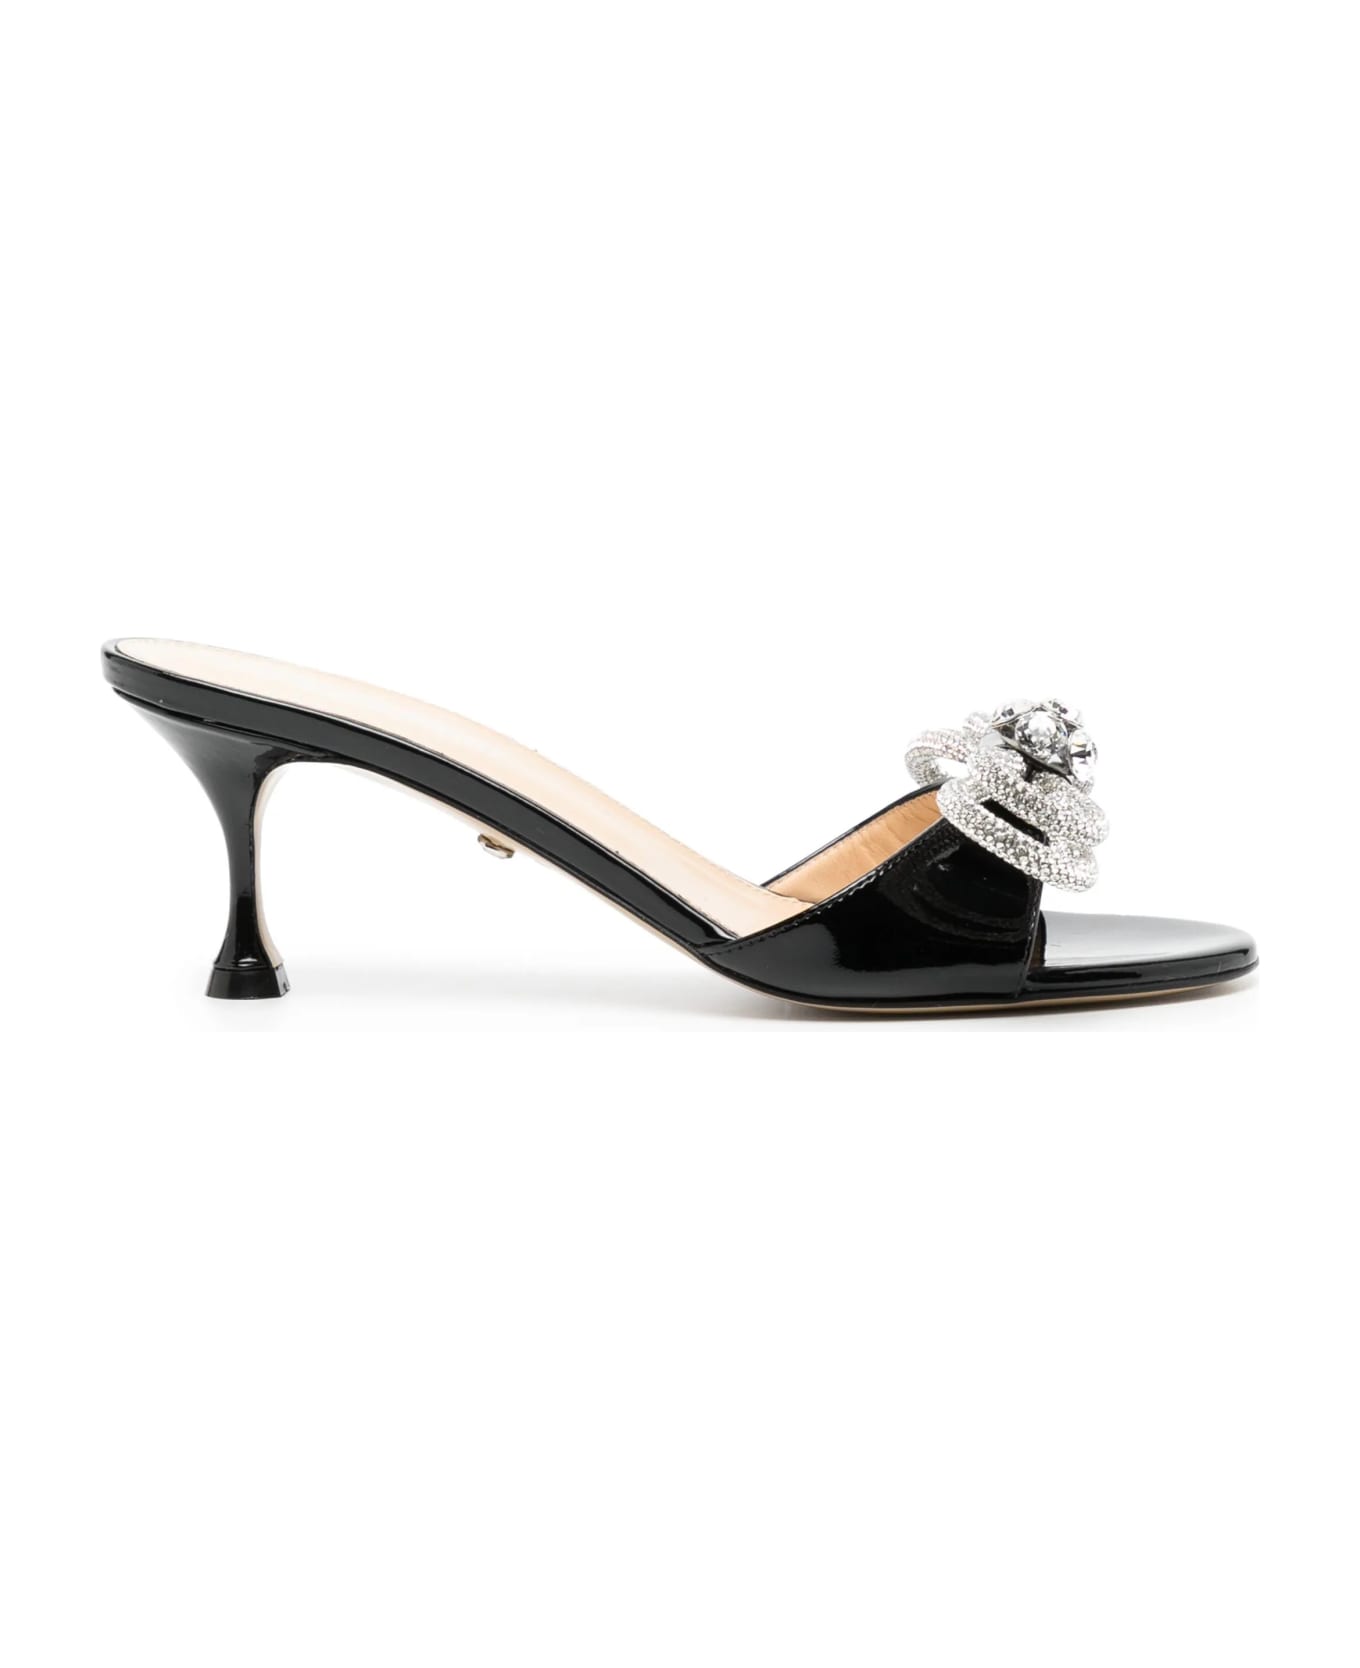 Mach & Mach 65 Double Bow Patent Leather Mules In Black - Black